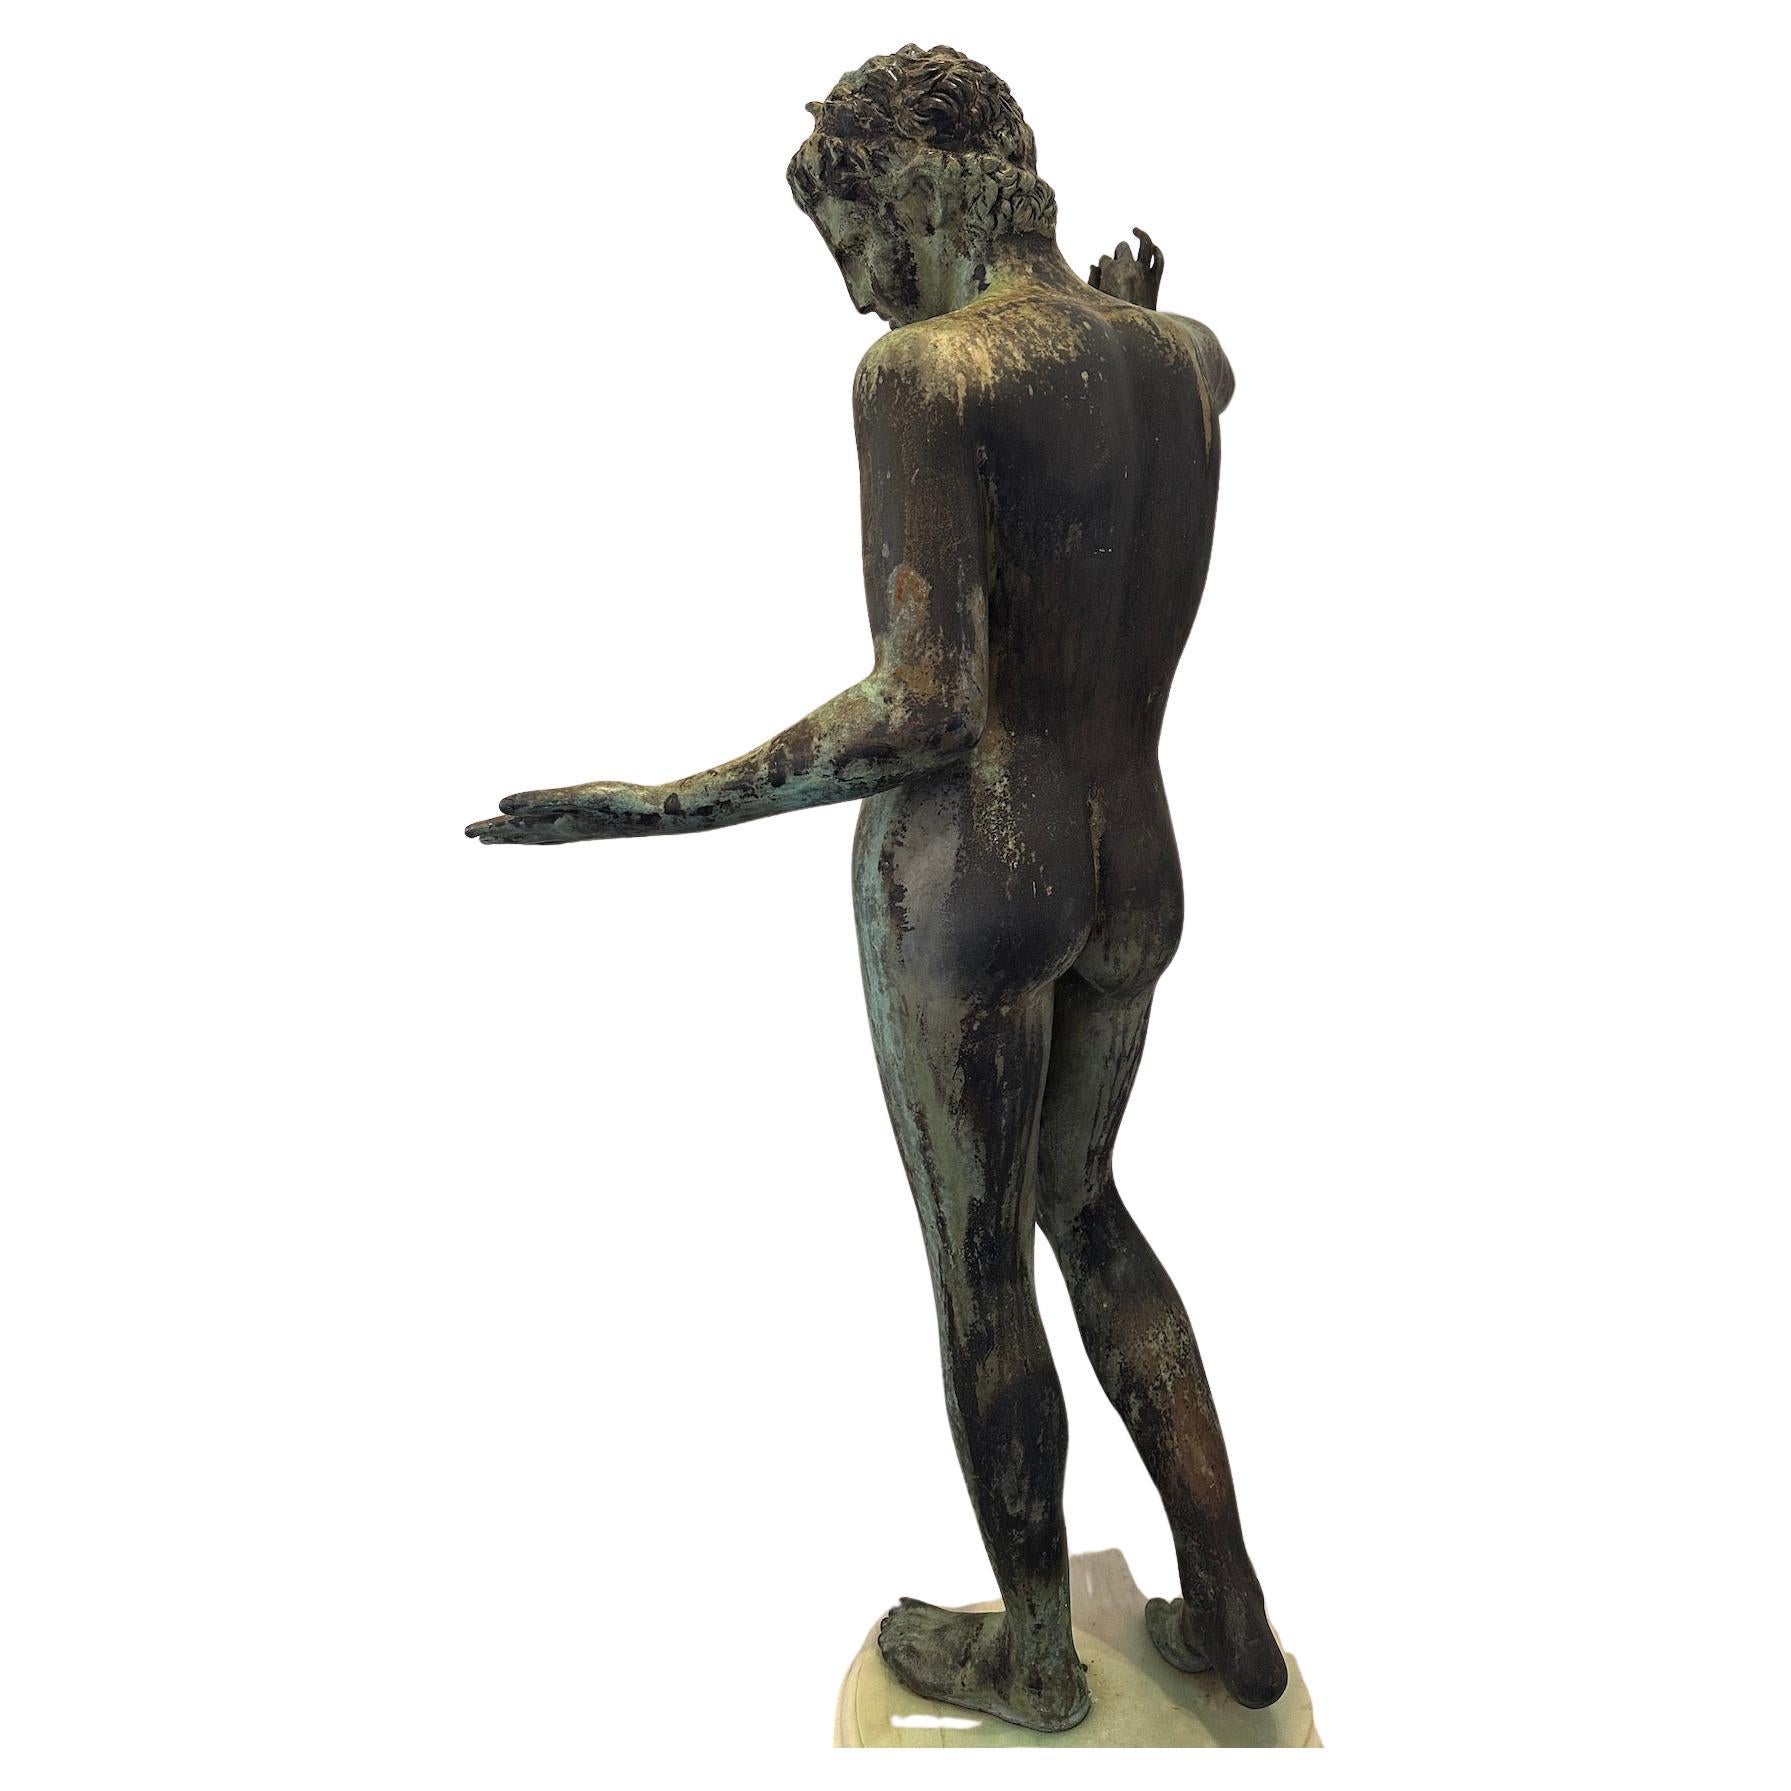 A verdigris bronze figure of a young male mounted on a marble plinth. in Grand Tour style.  